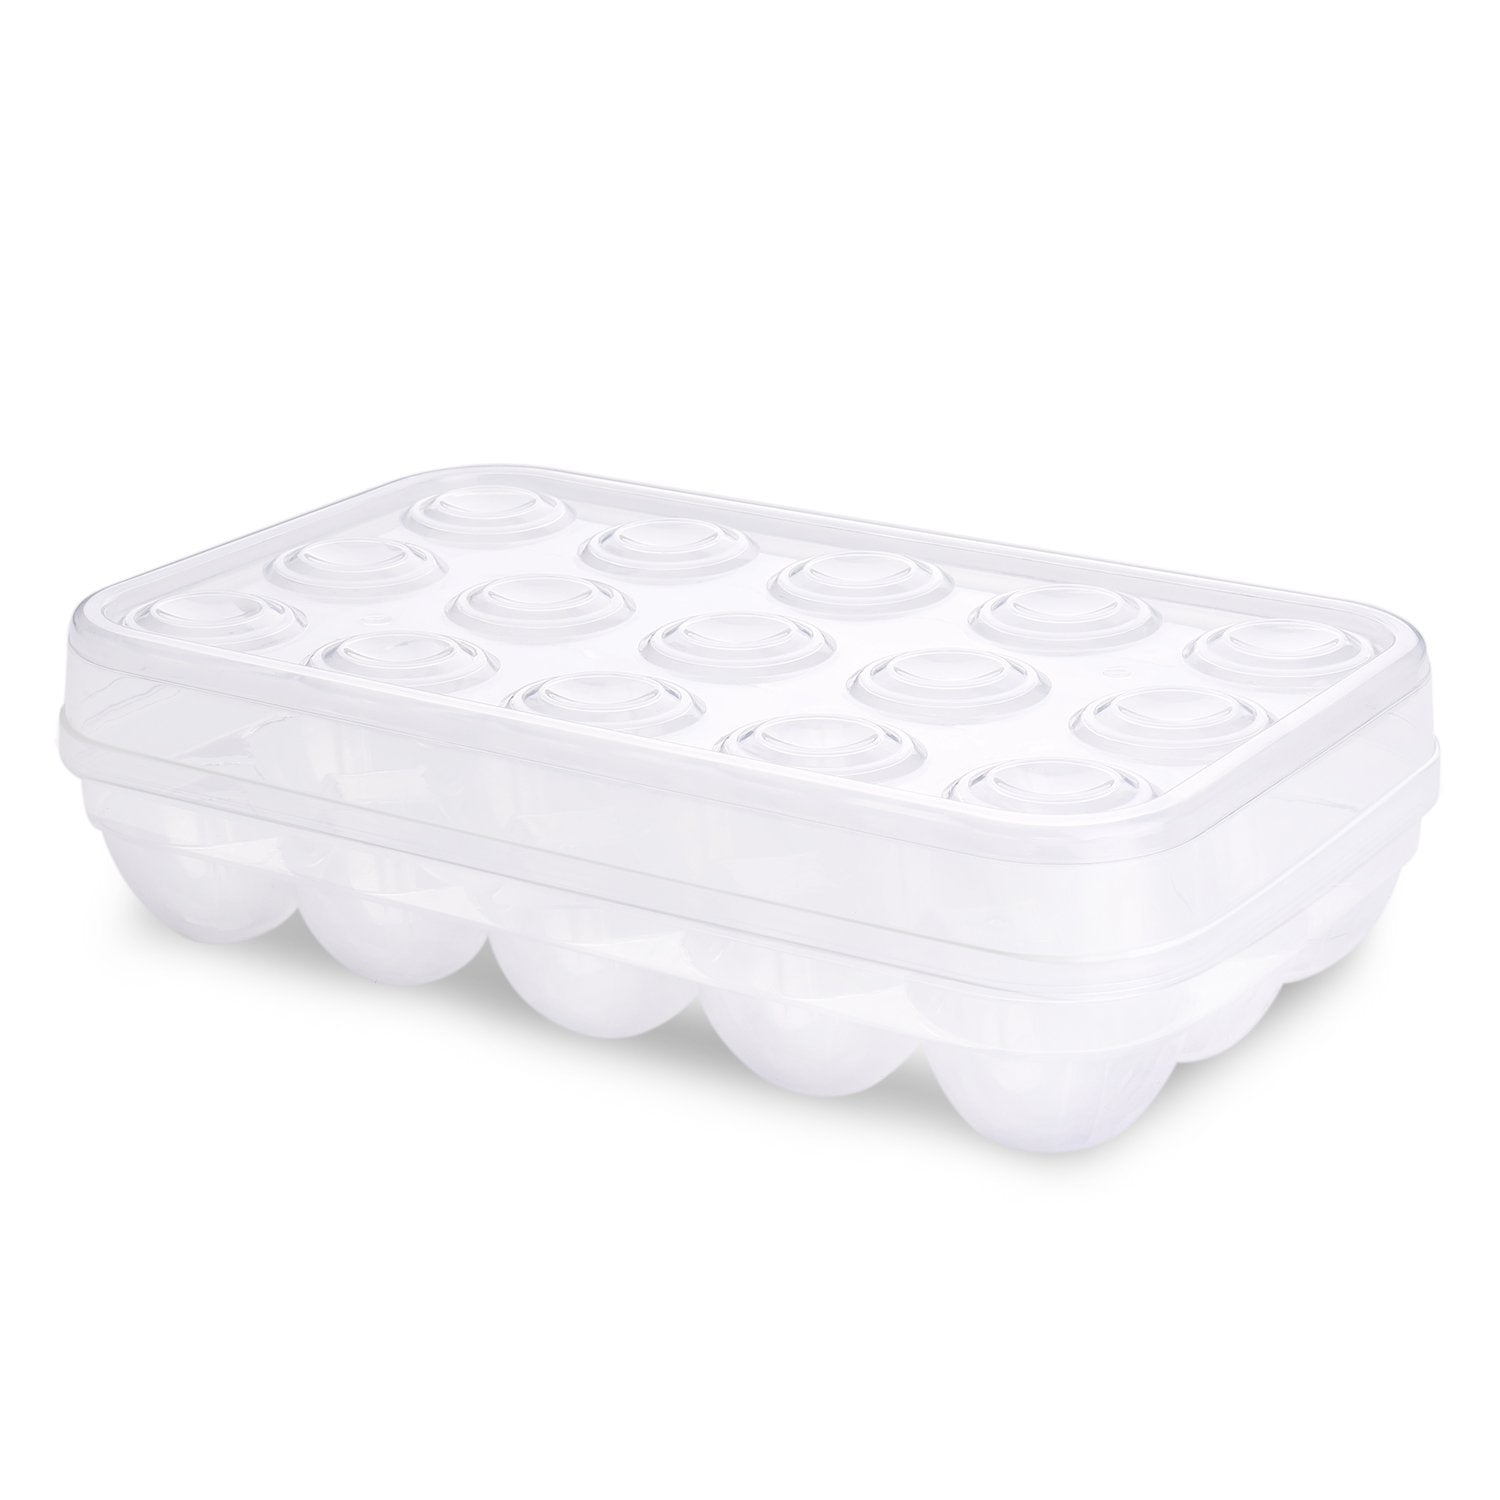 Flexzion Covered 15 Eggs Holder - Plastic Eggs Tray Container Dispenser Case Carton Box Carrier Stackable Storage Organizer Storer Keeper with Clear Lid Large Capacity for Refrigerator Fridge Home